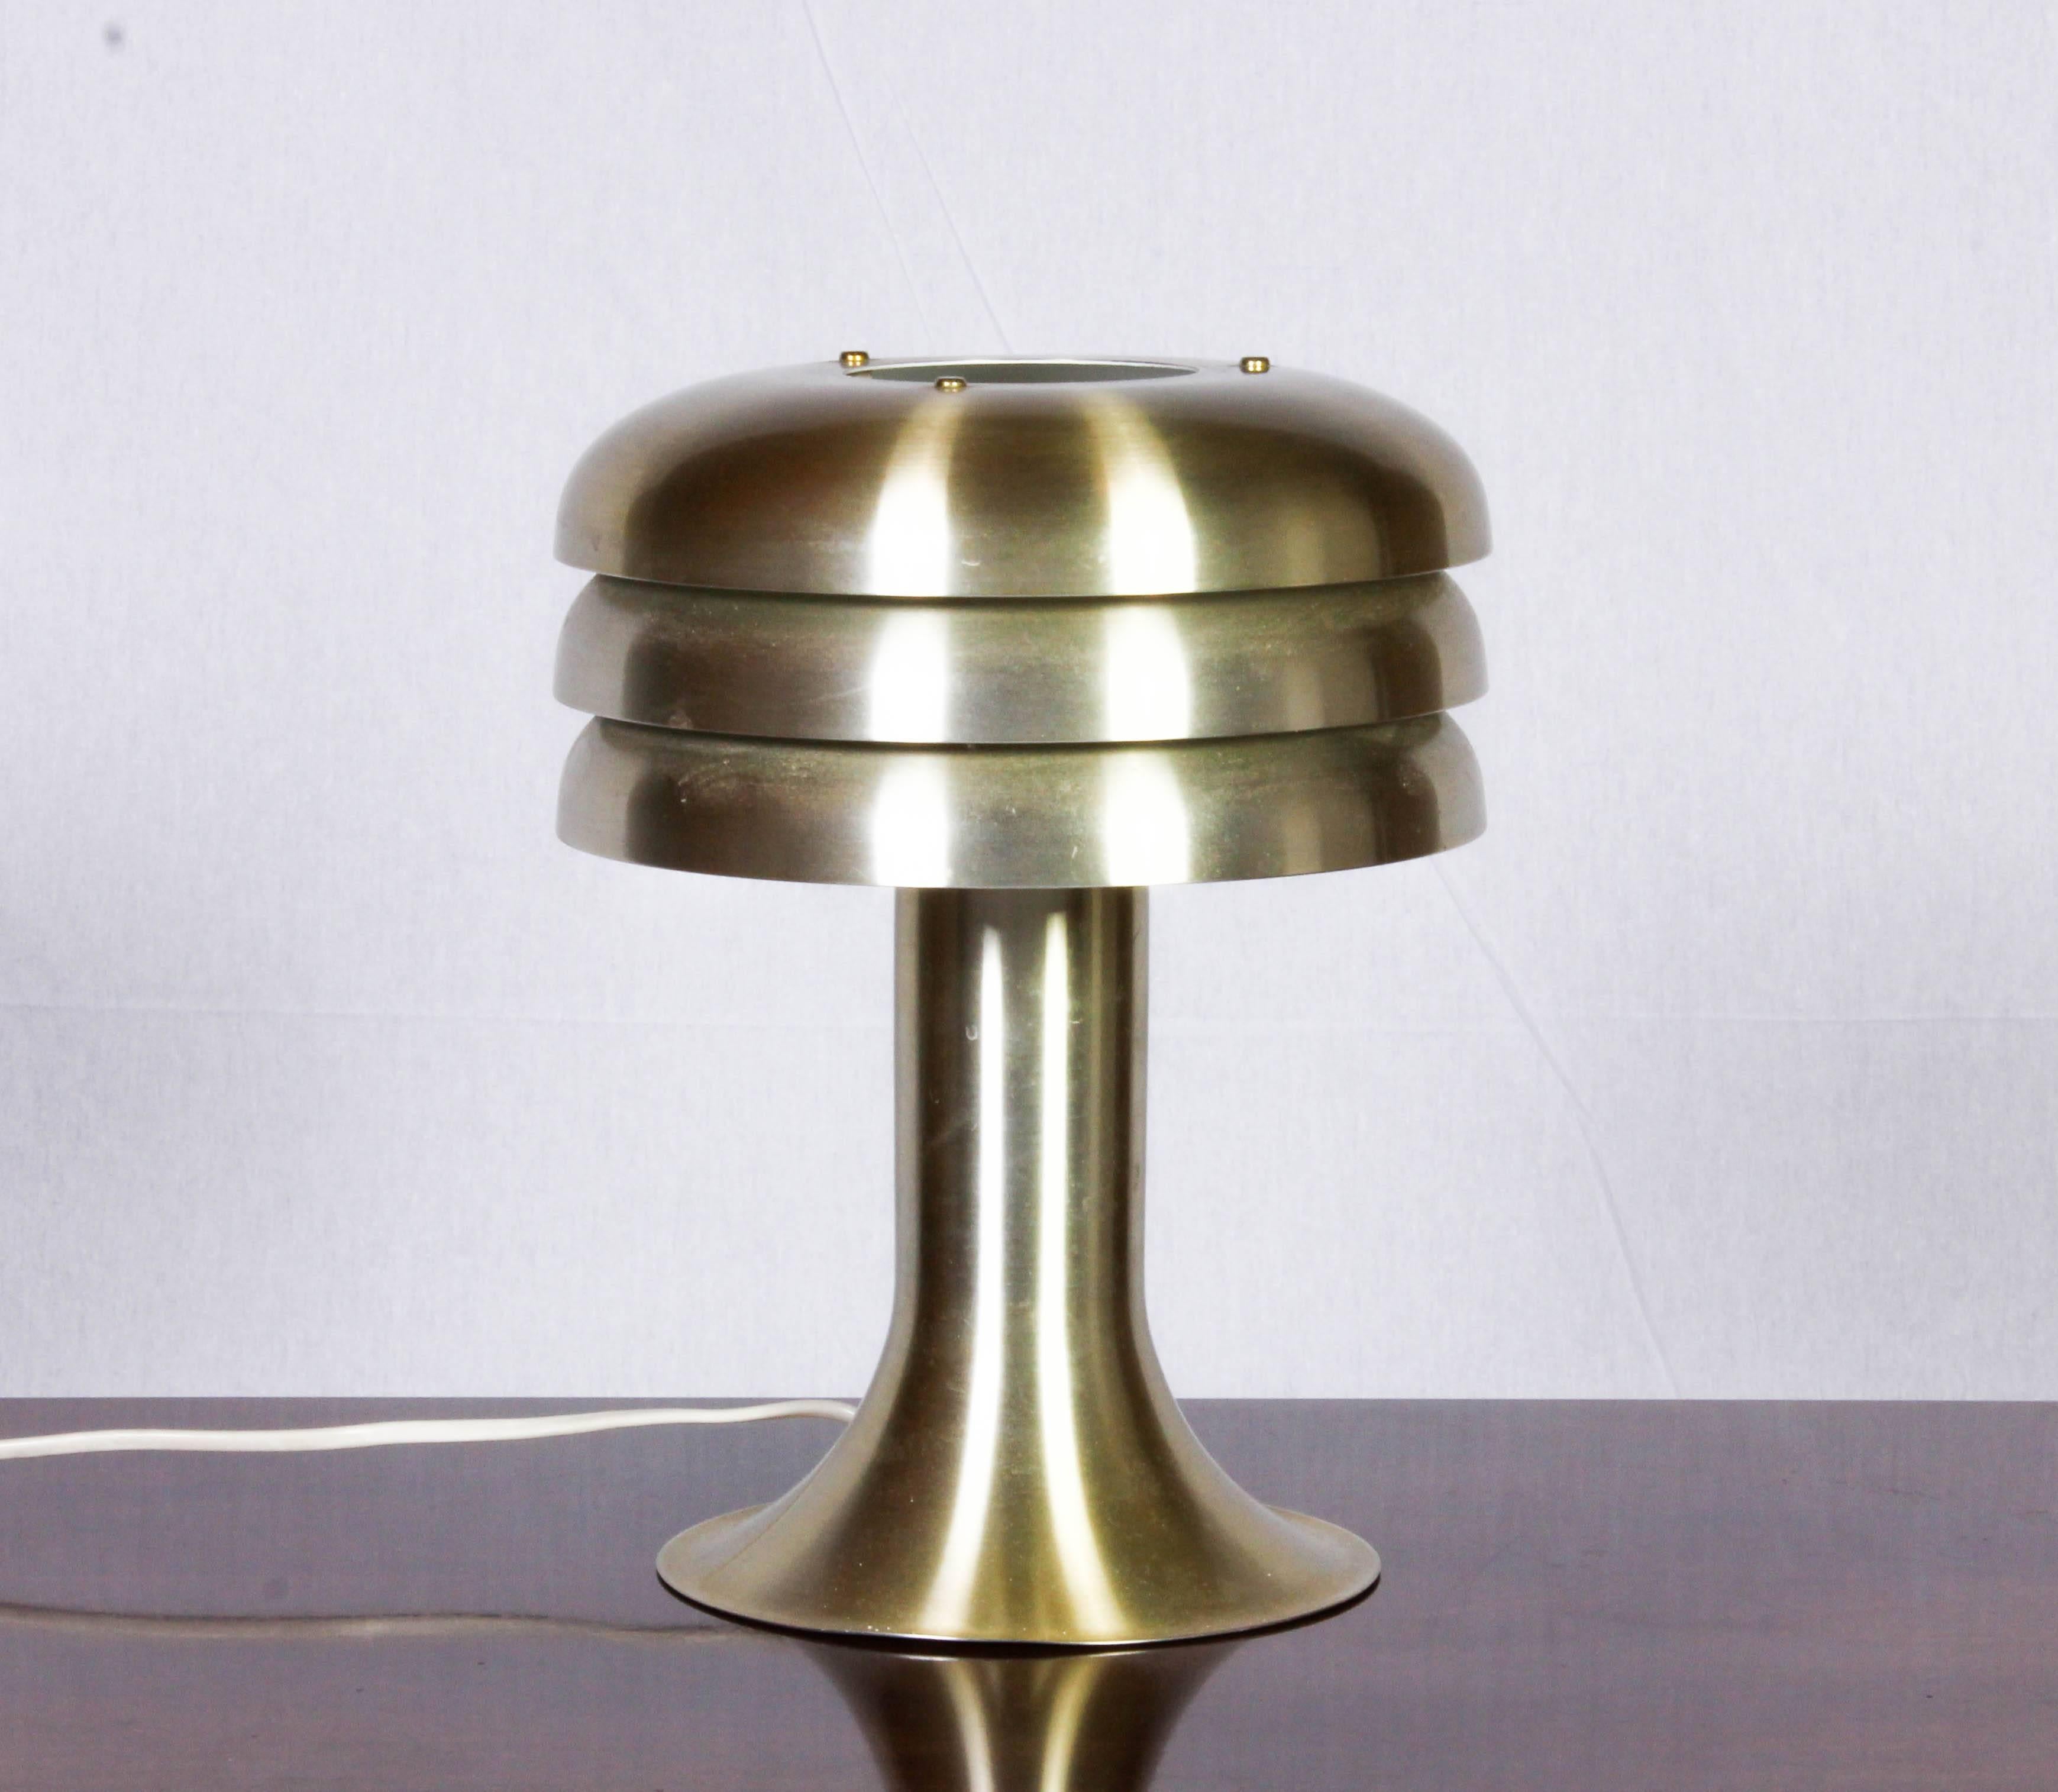 Brass table lamp model BN-25 by Swedish designer Hans Agne Jakobsson. The lamp is in very good vintage condition with minor signs of usage and no damages.